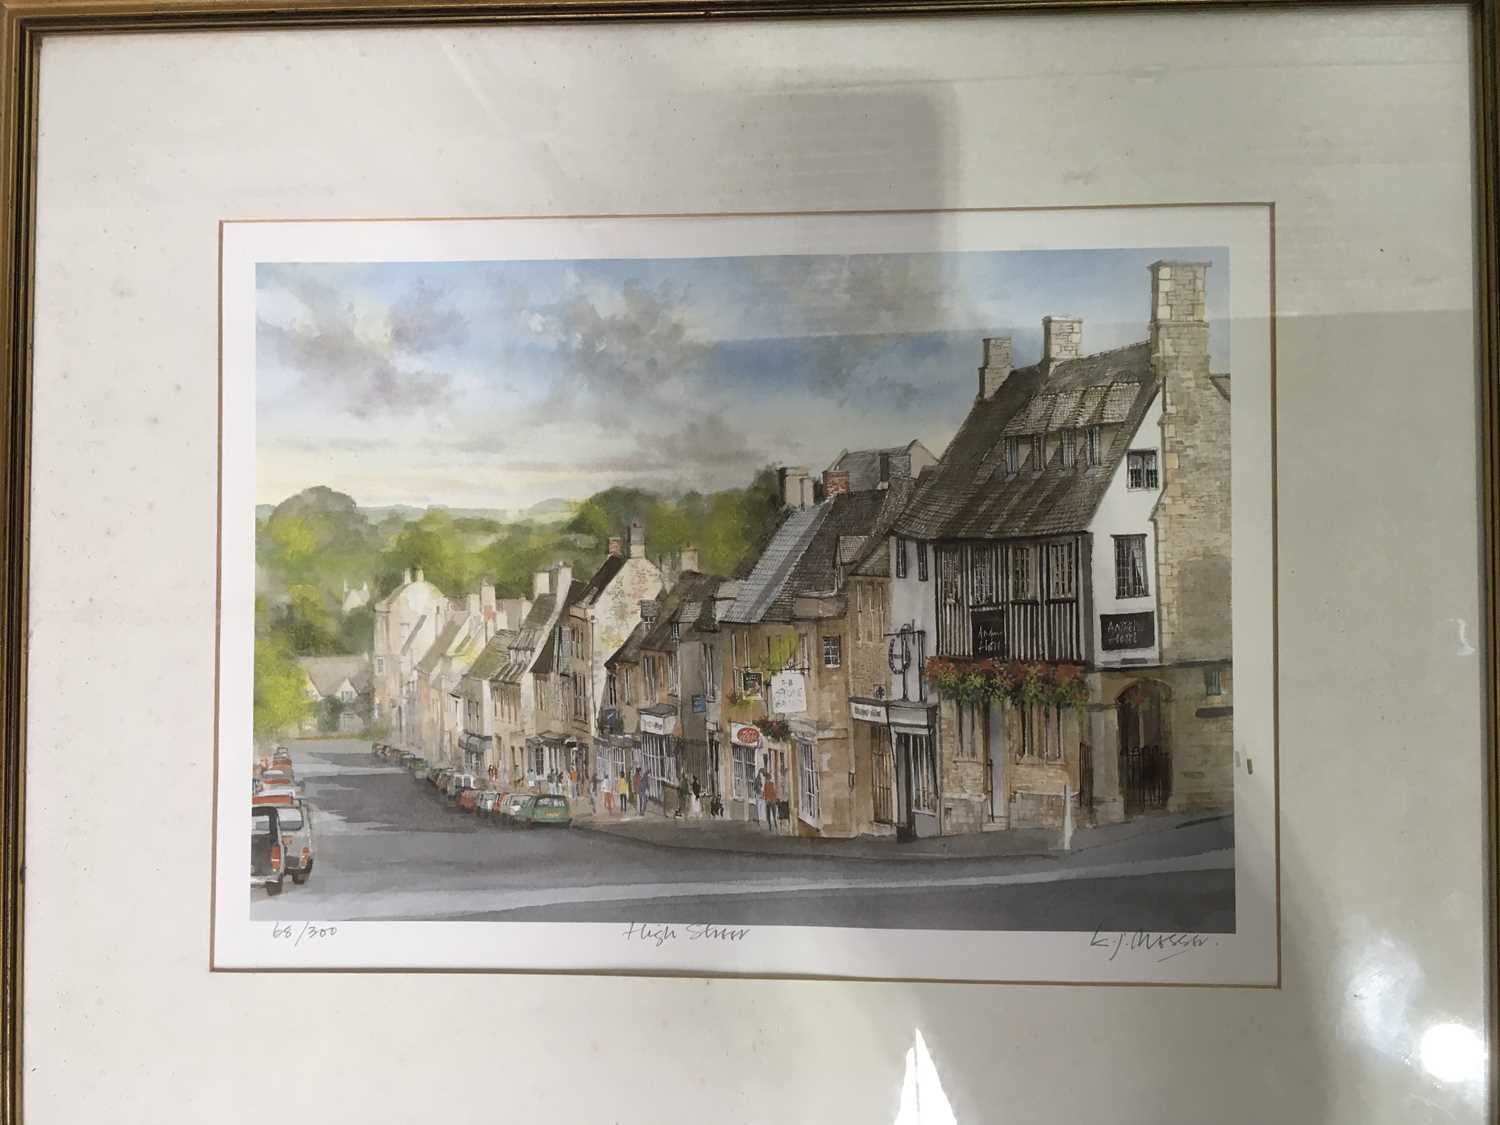 E J Messer, a pair of Limited Edition prints, The Hill Burford, and High Street, both from - Image 2 of 3